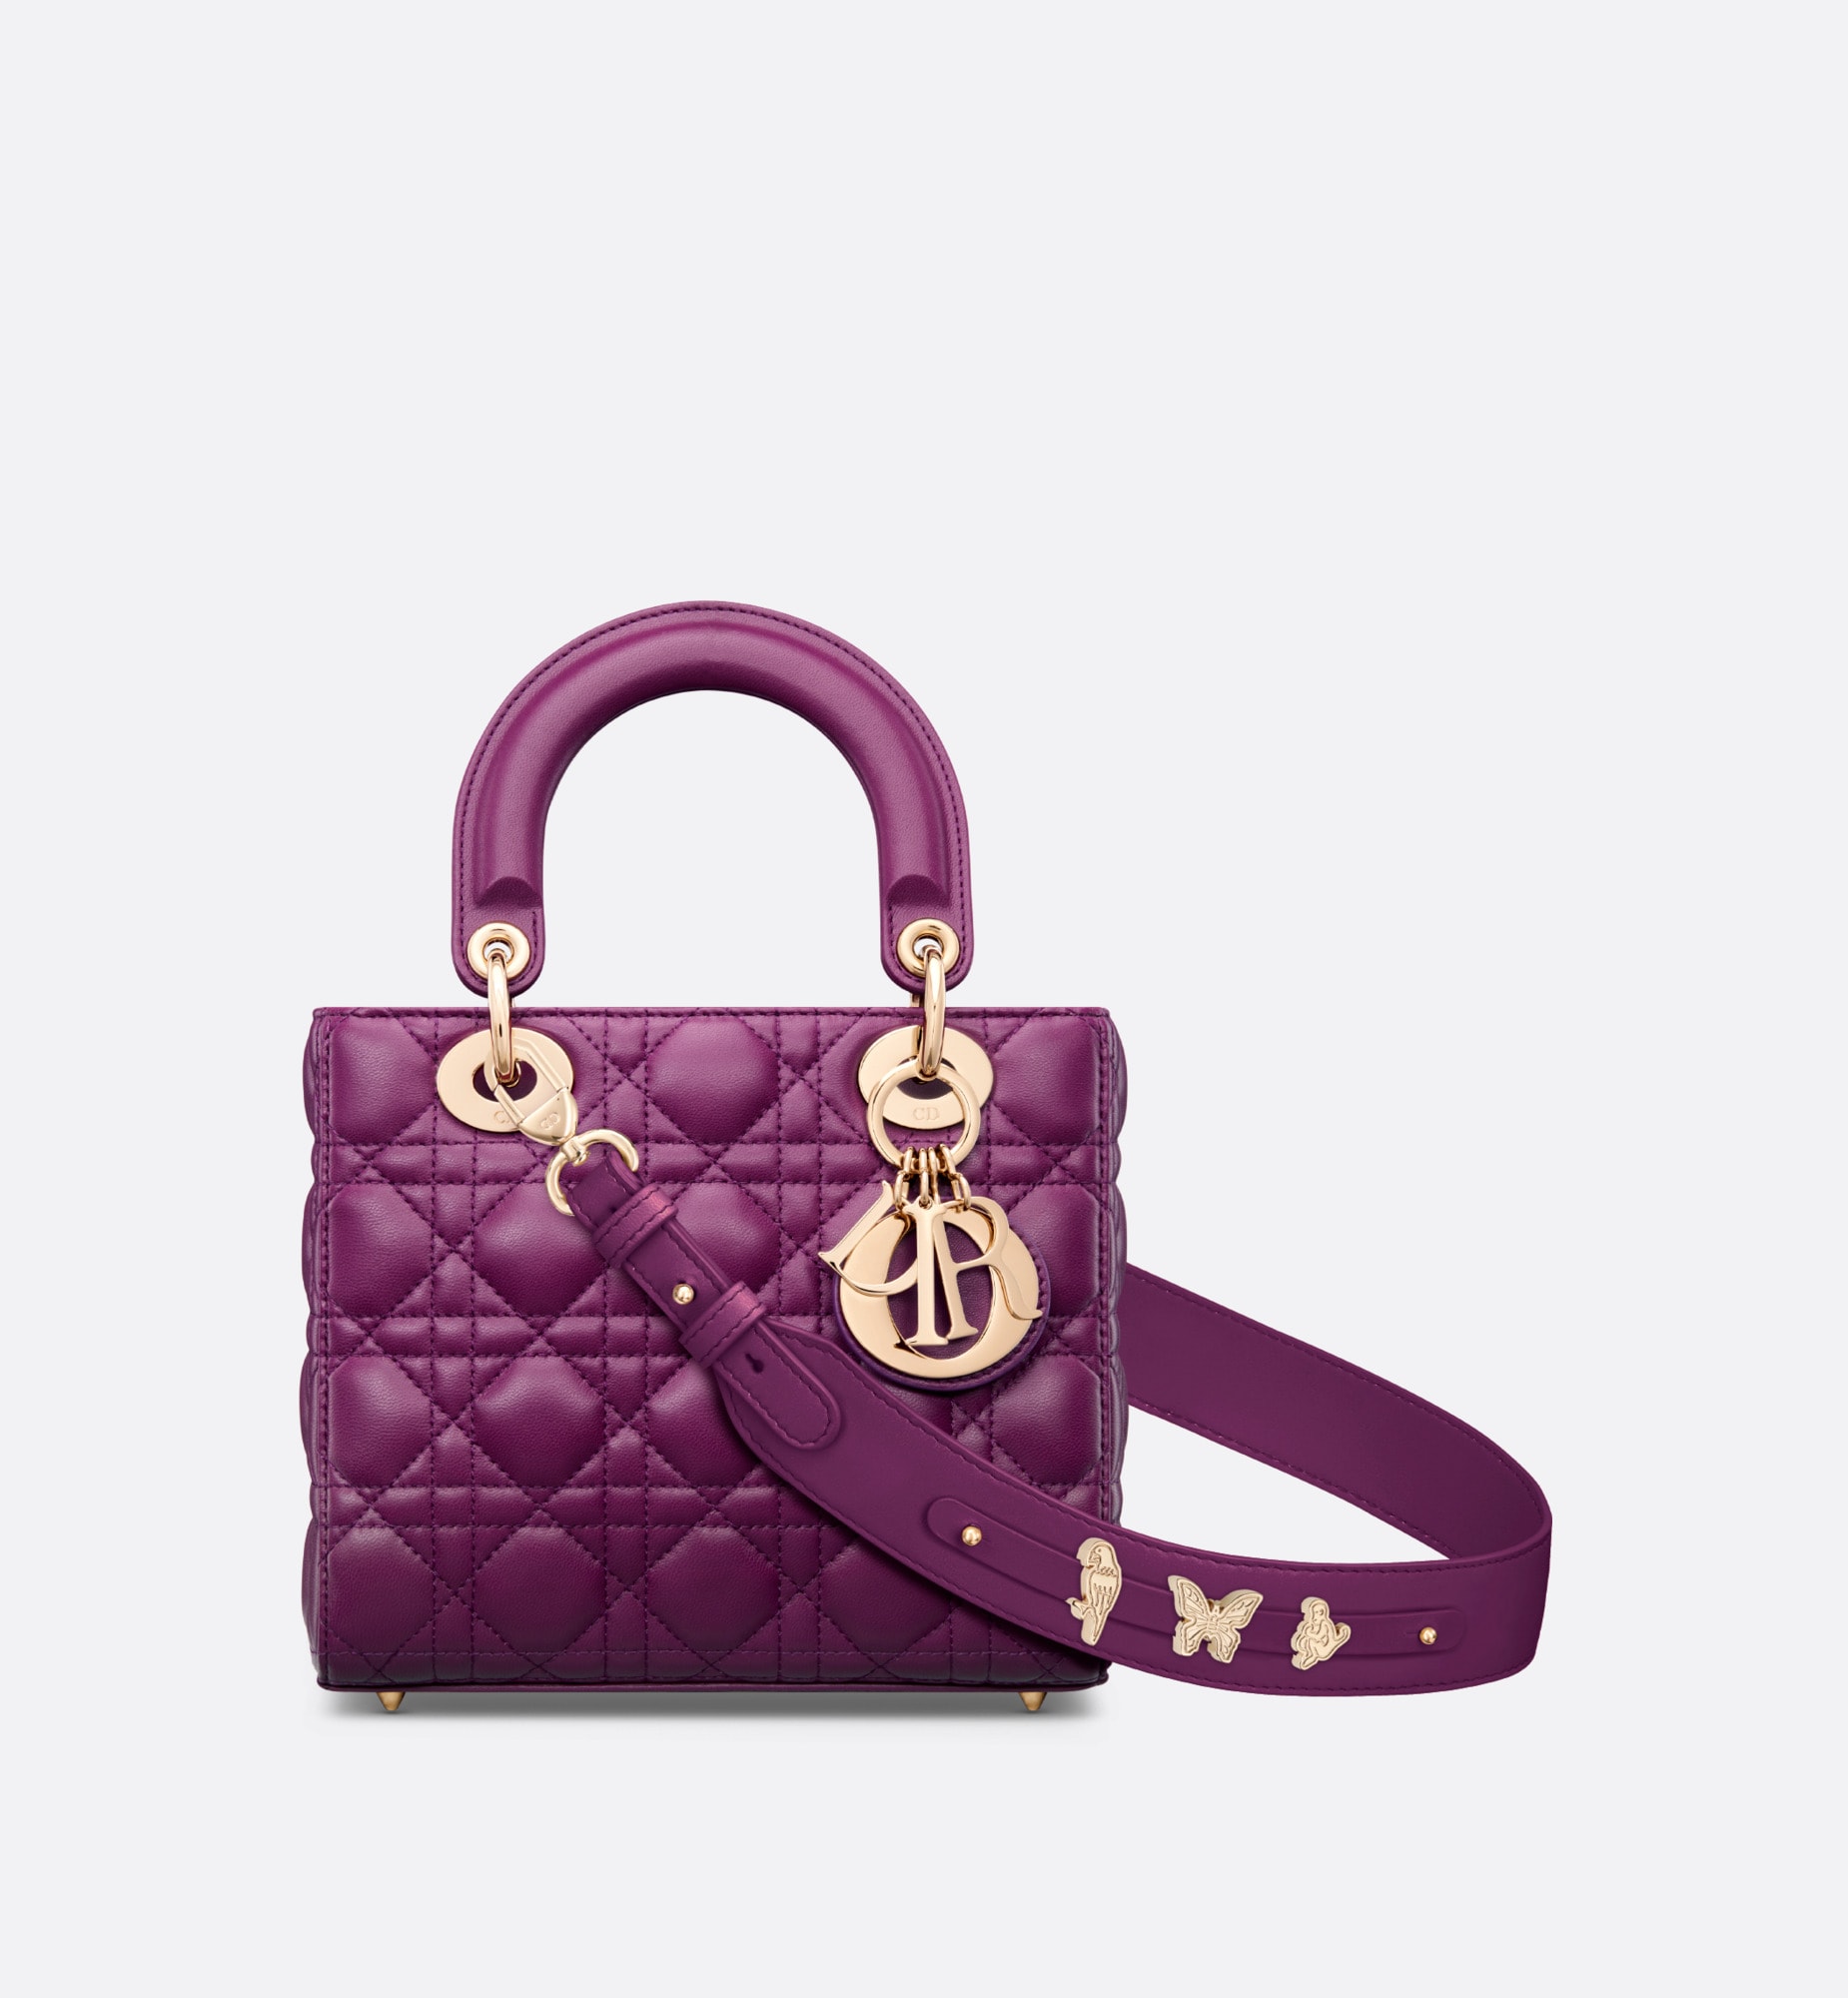 Small Lady Dior My ABCDior Bag Mulberry small lady dior bag purple